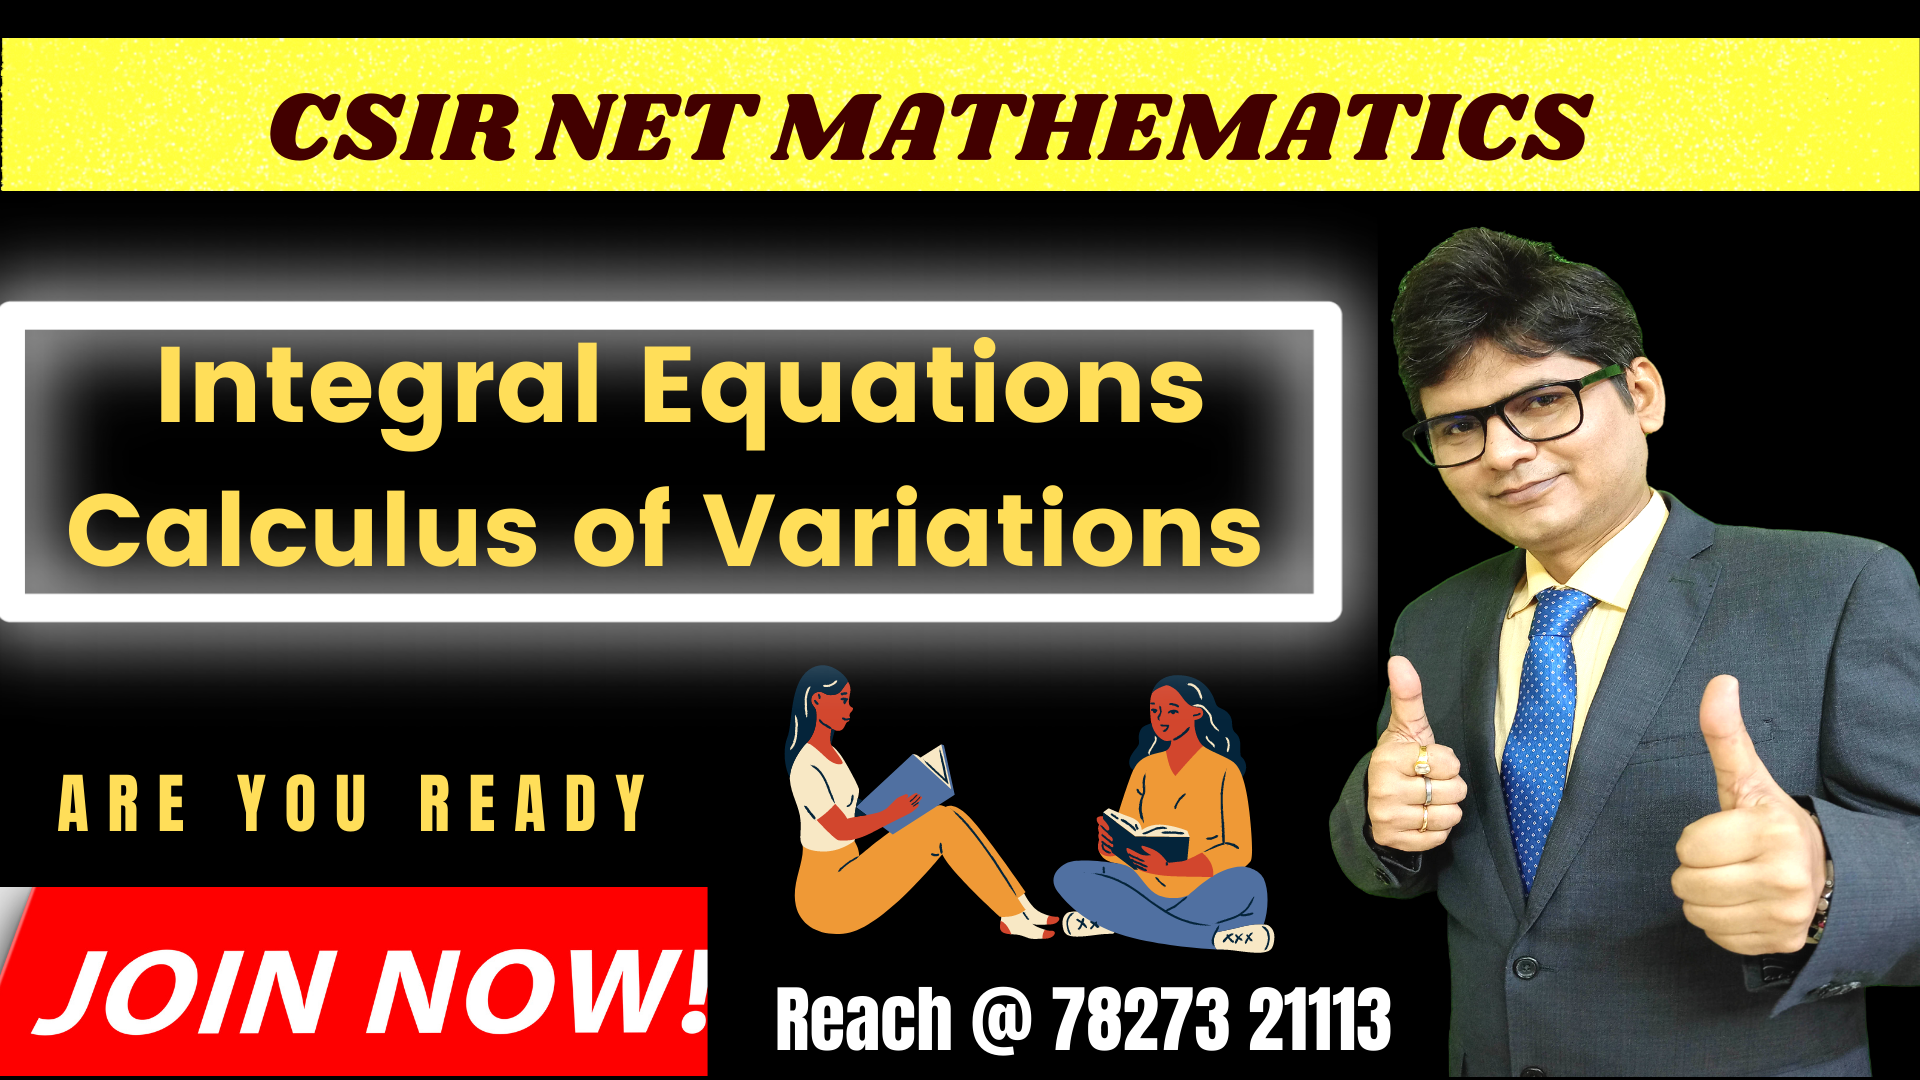 Integral Equations, Calculus of Variations